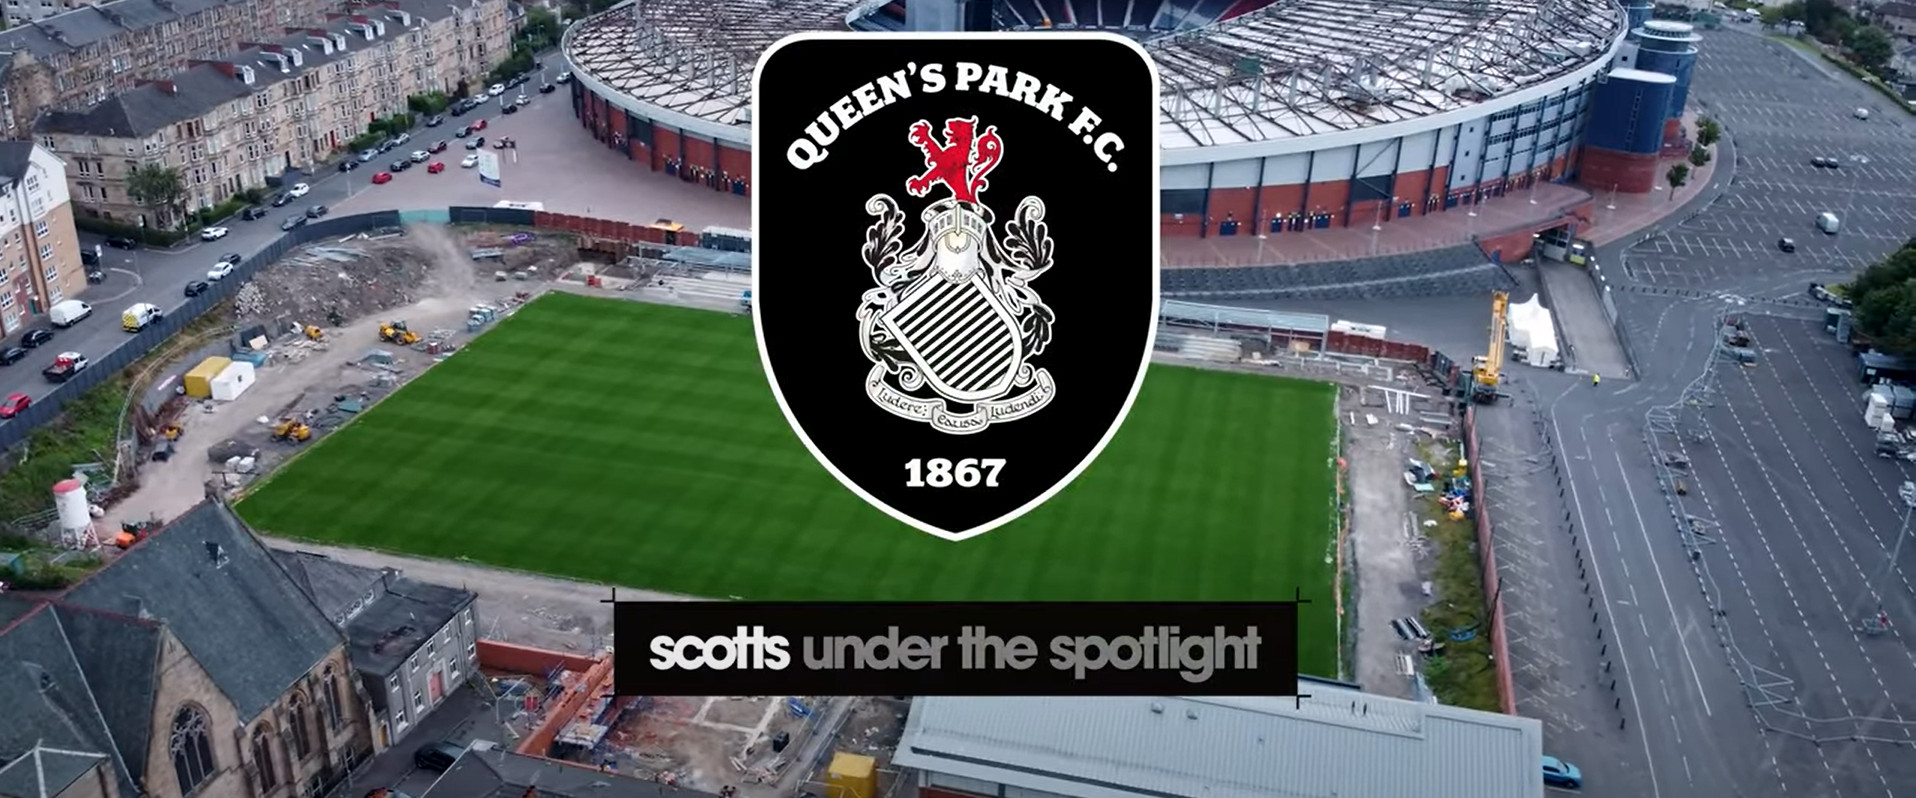 Menswear specialists scotts look ahead to the new football season with a short film examining queen’s park f.c.